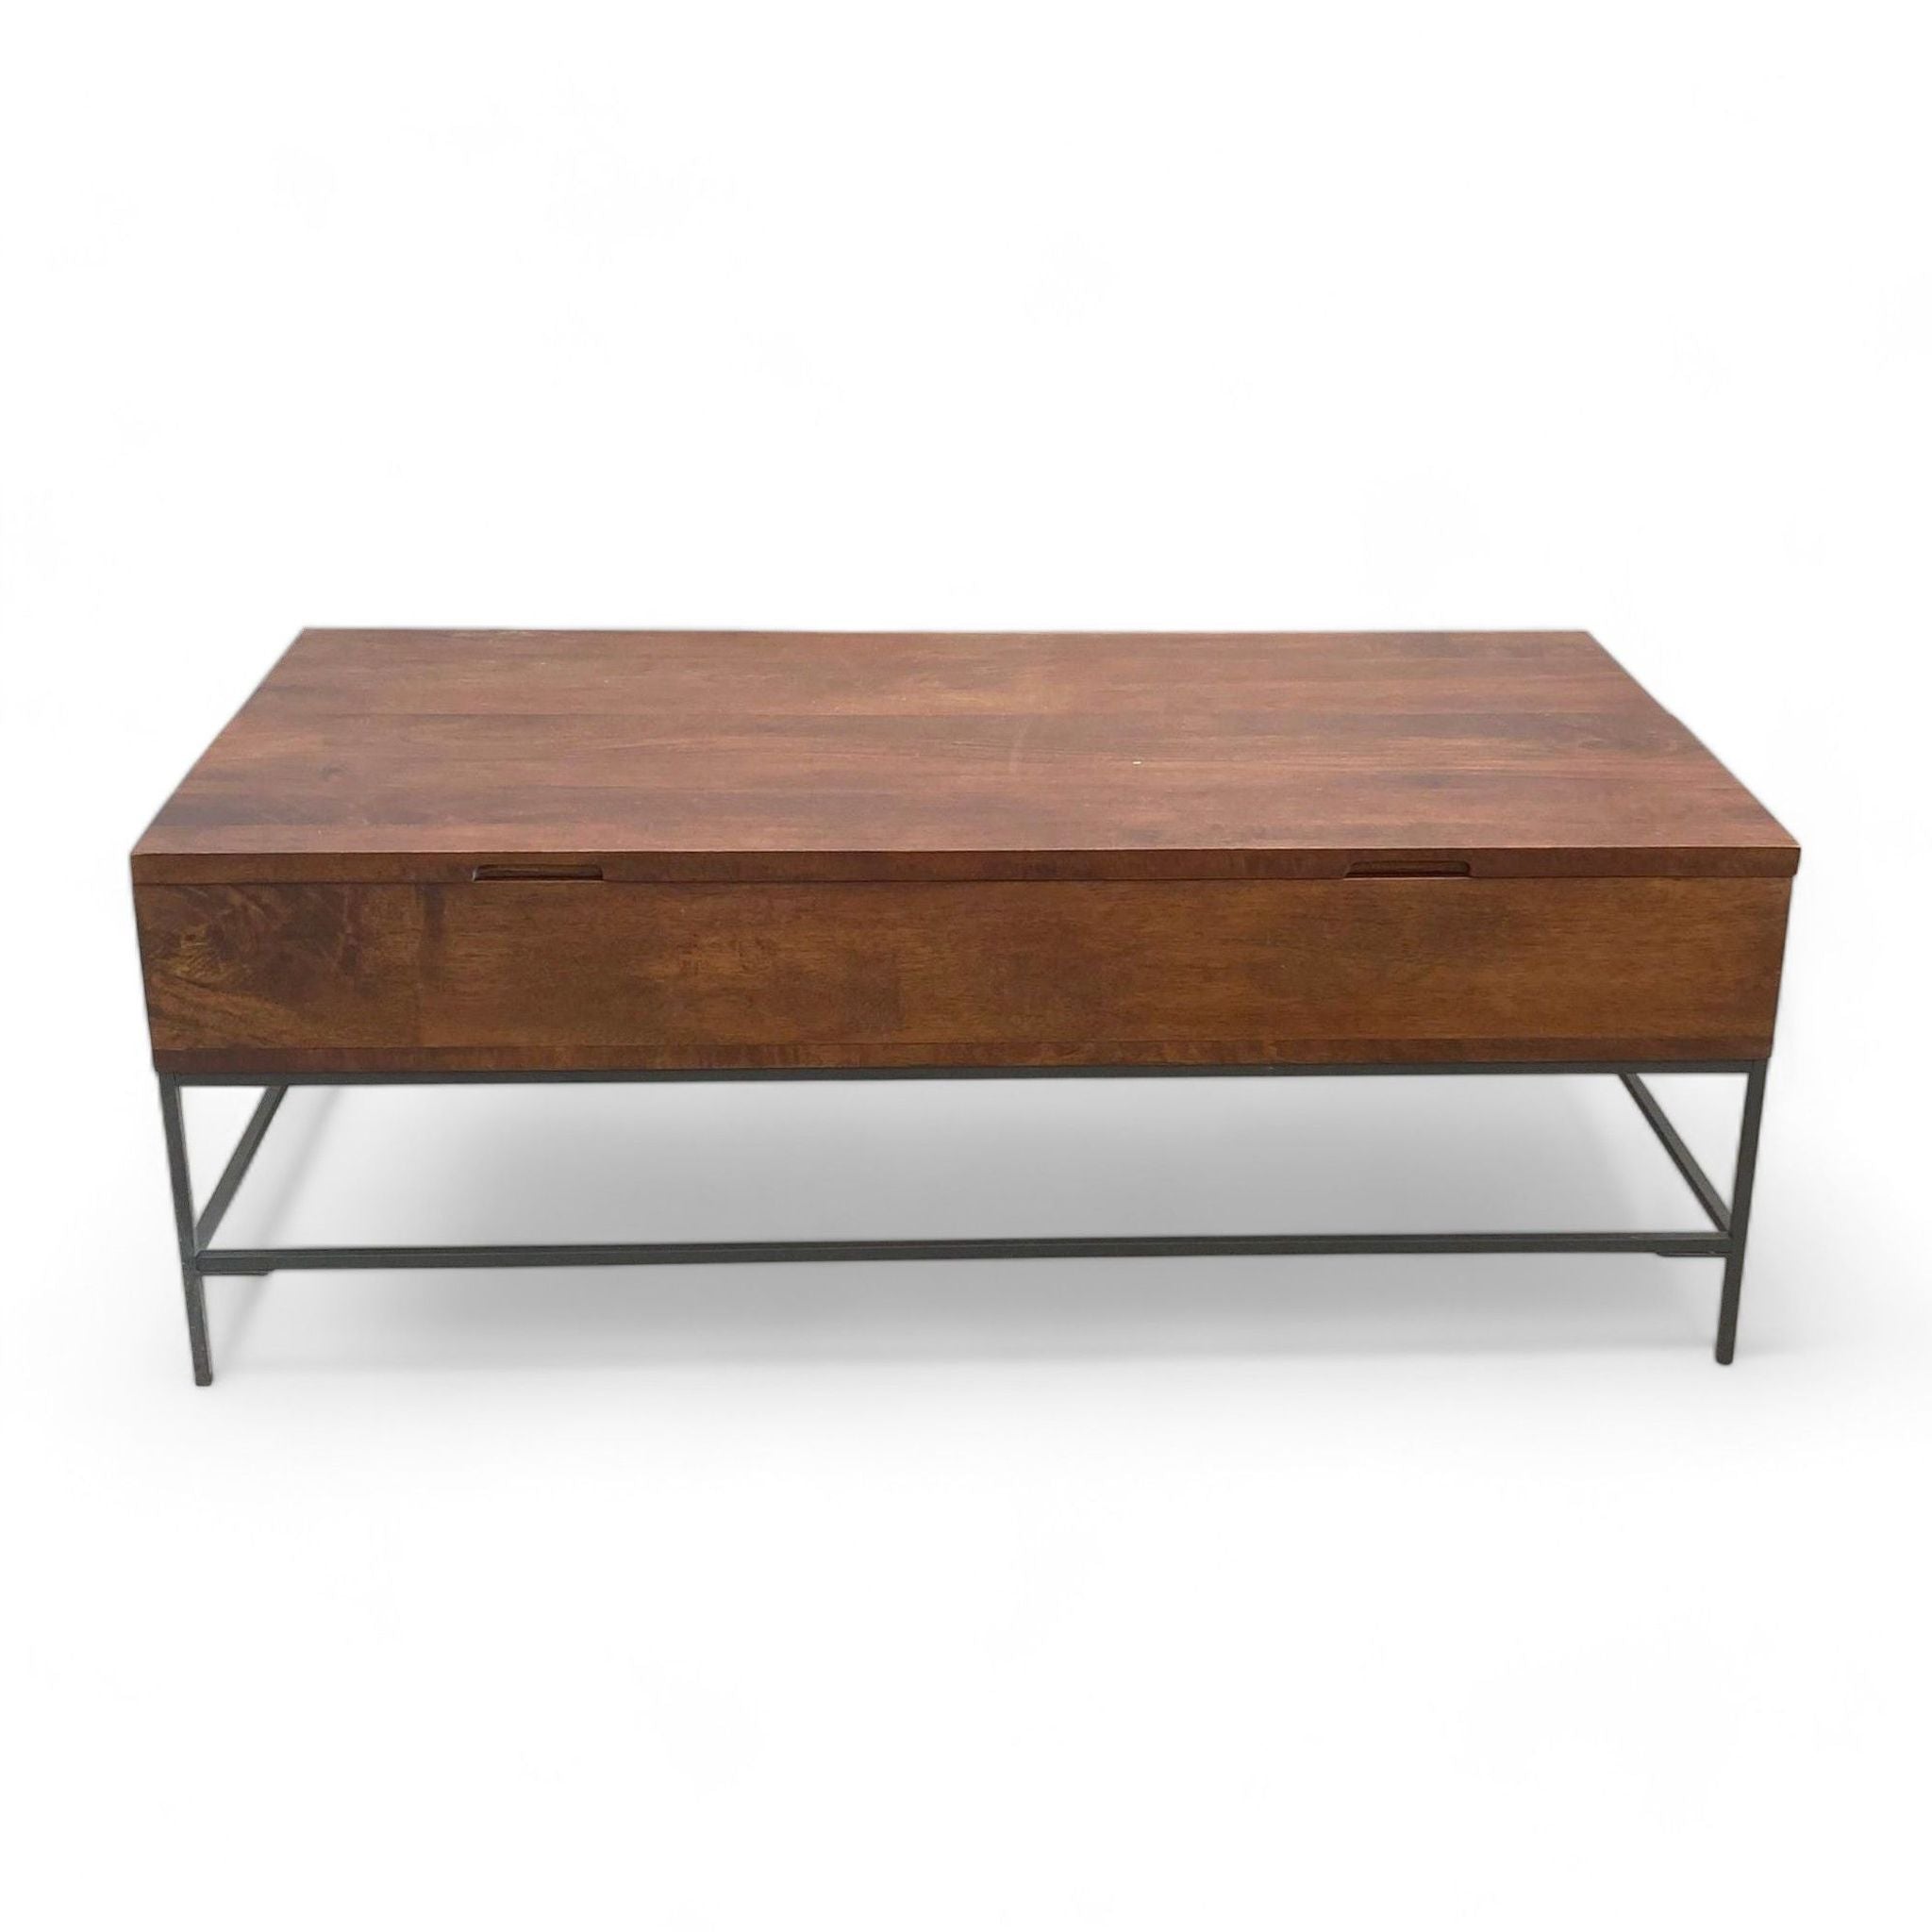 Williams Sonoma coffee table with lift top closed, on a metal frame, on a plain background.